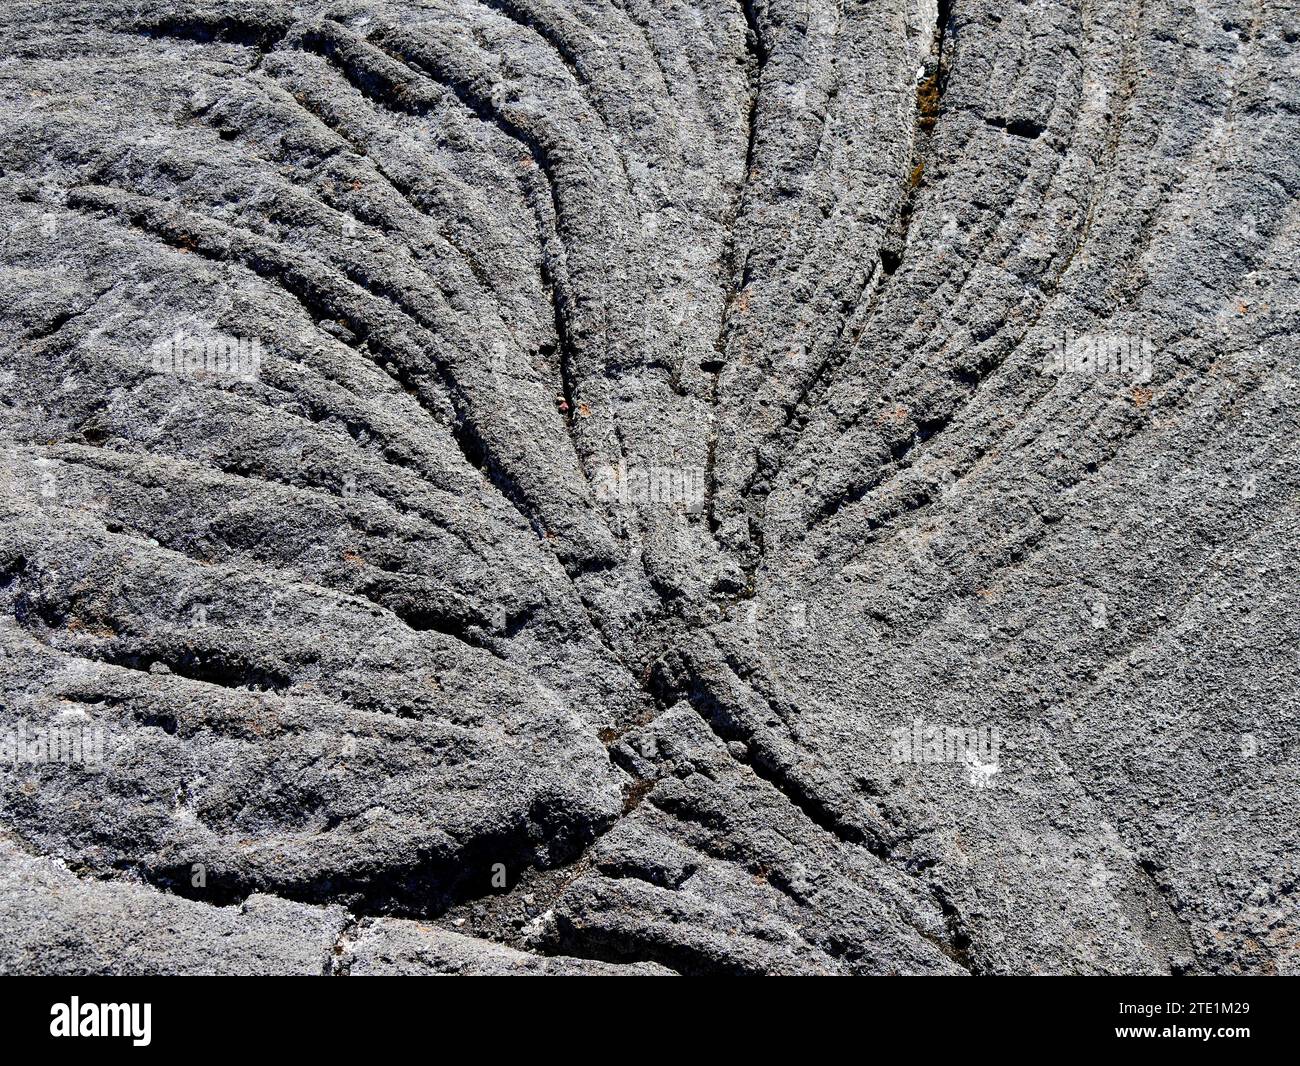 Stange shape of a tree in the solidified lava flow of piton de la Fournaise, Reunion, France Stock Photo